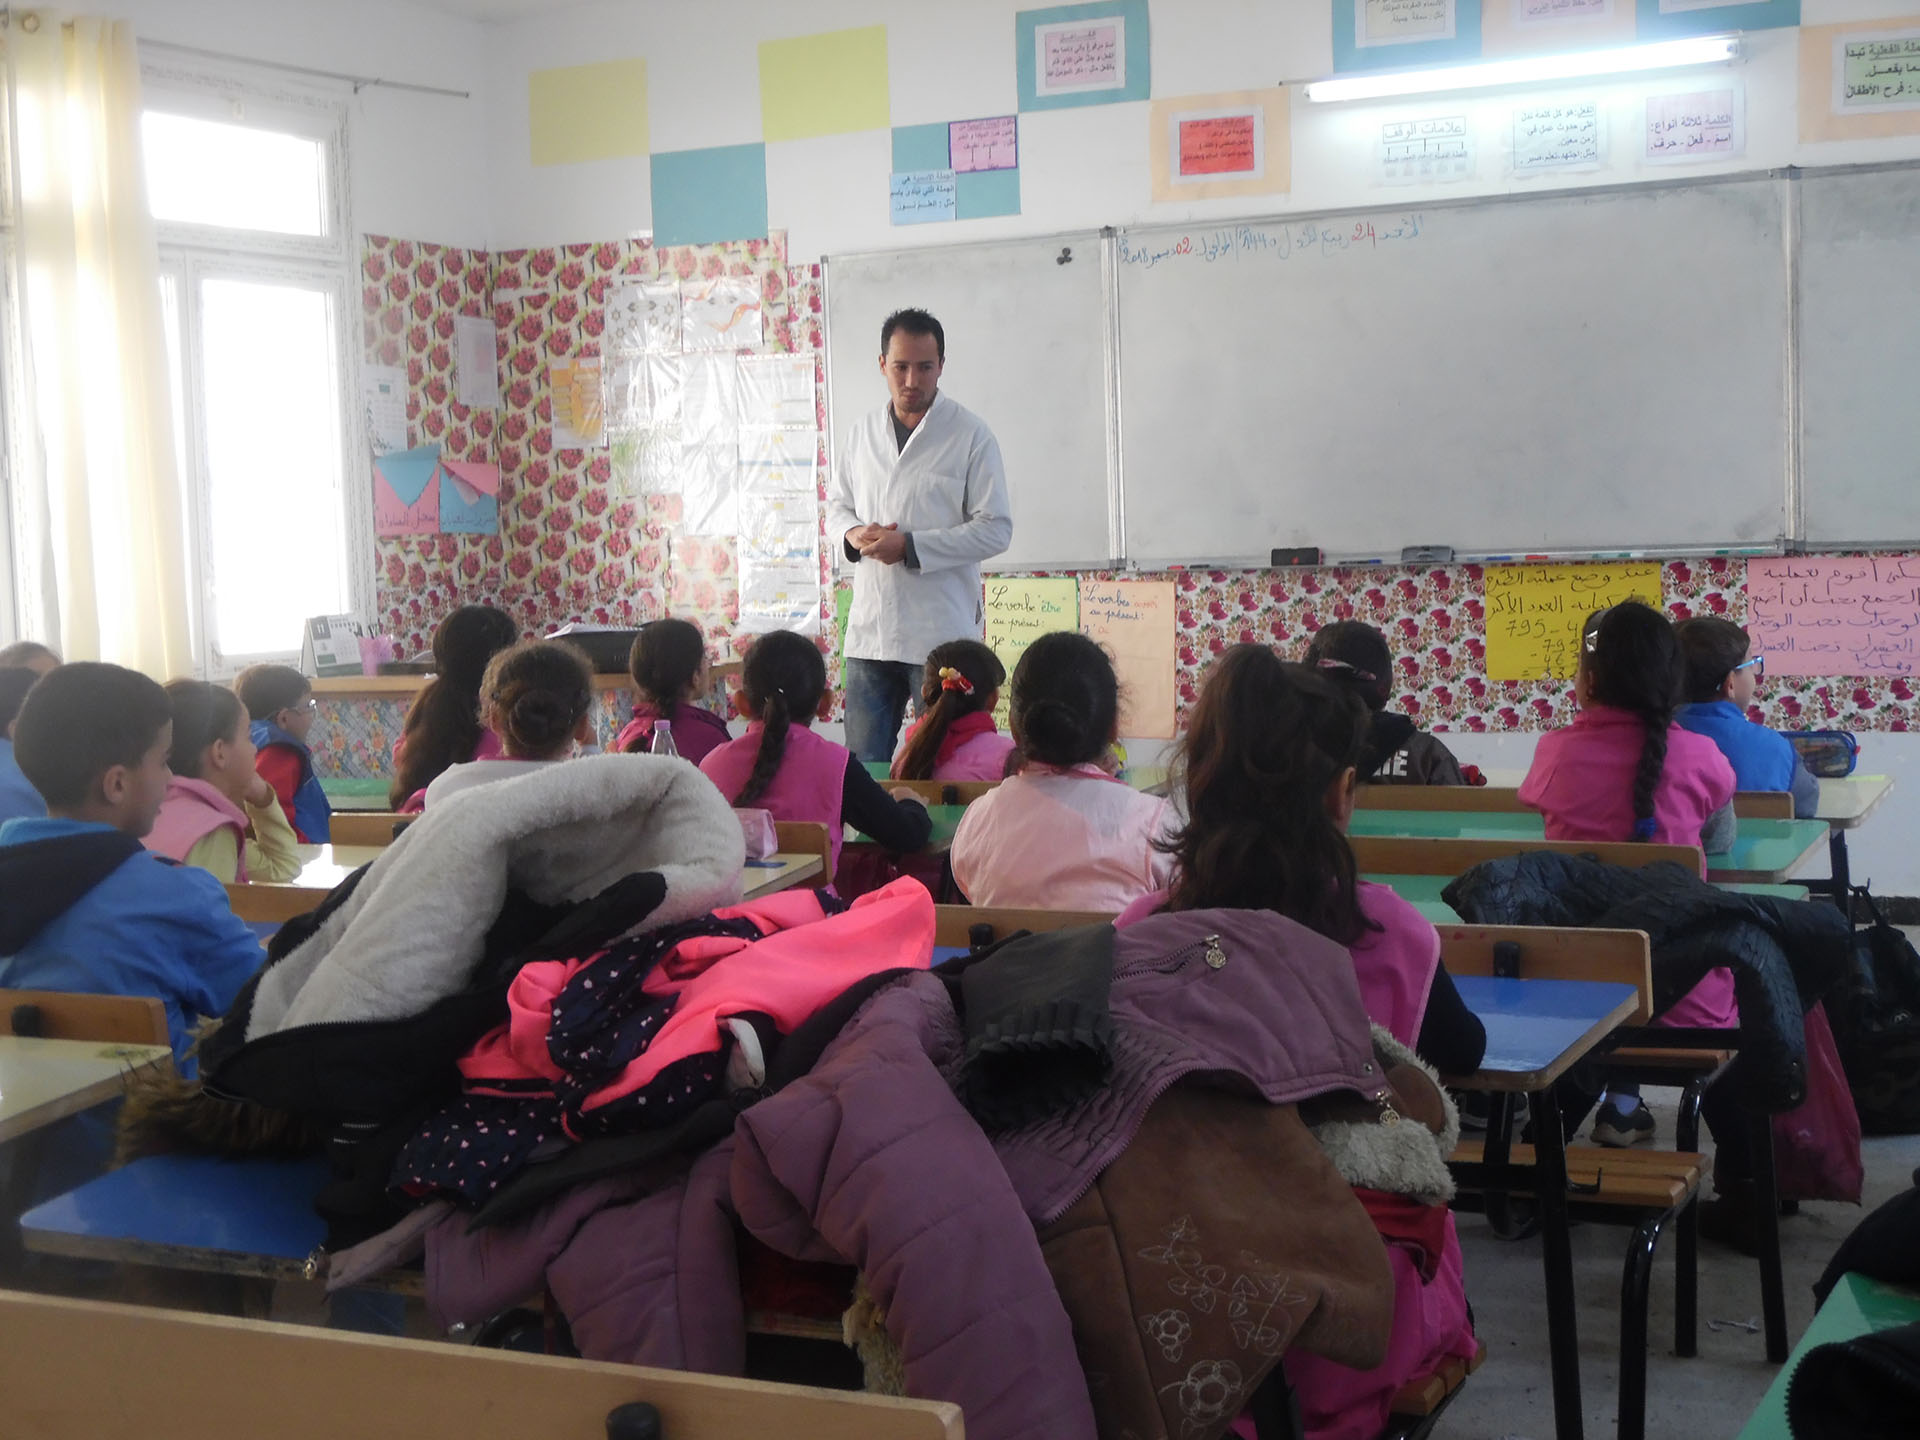 <p>Classroom during a course. The success of the project led to the construction of thirteen similar schools in Oran and Algiers.</p>